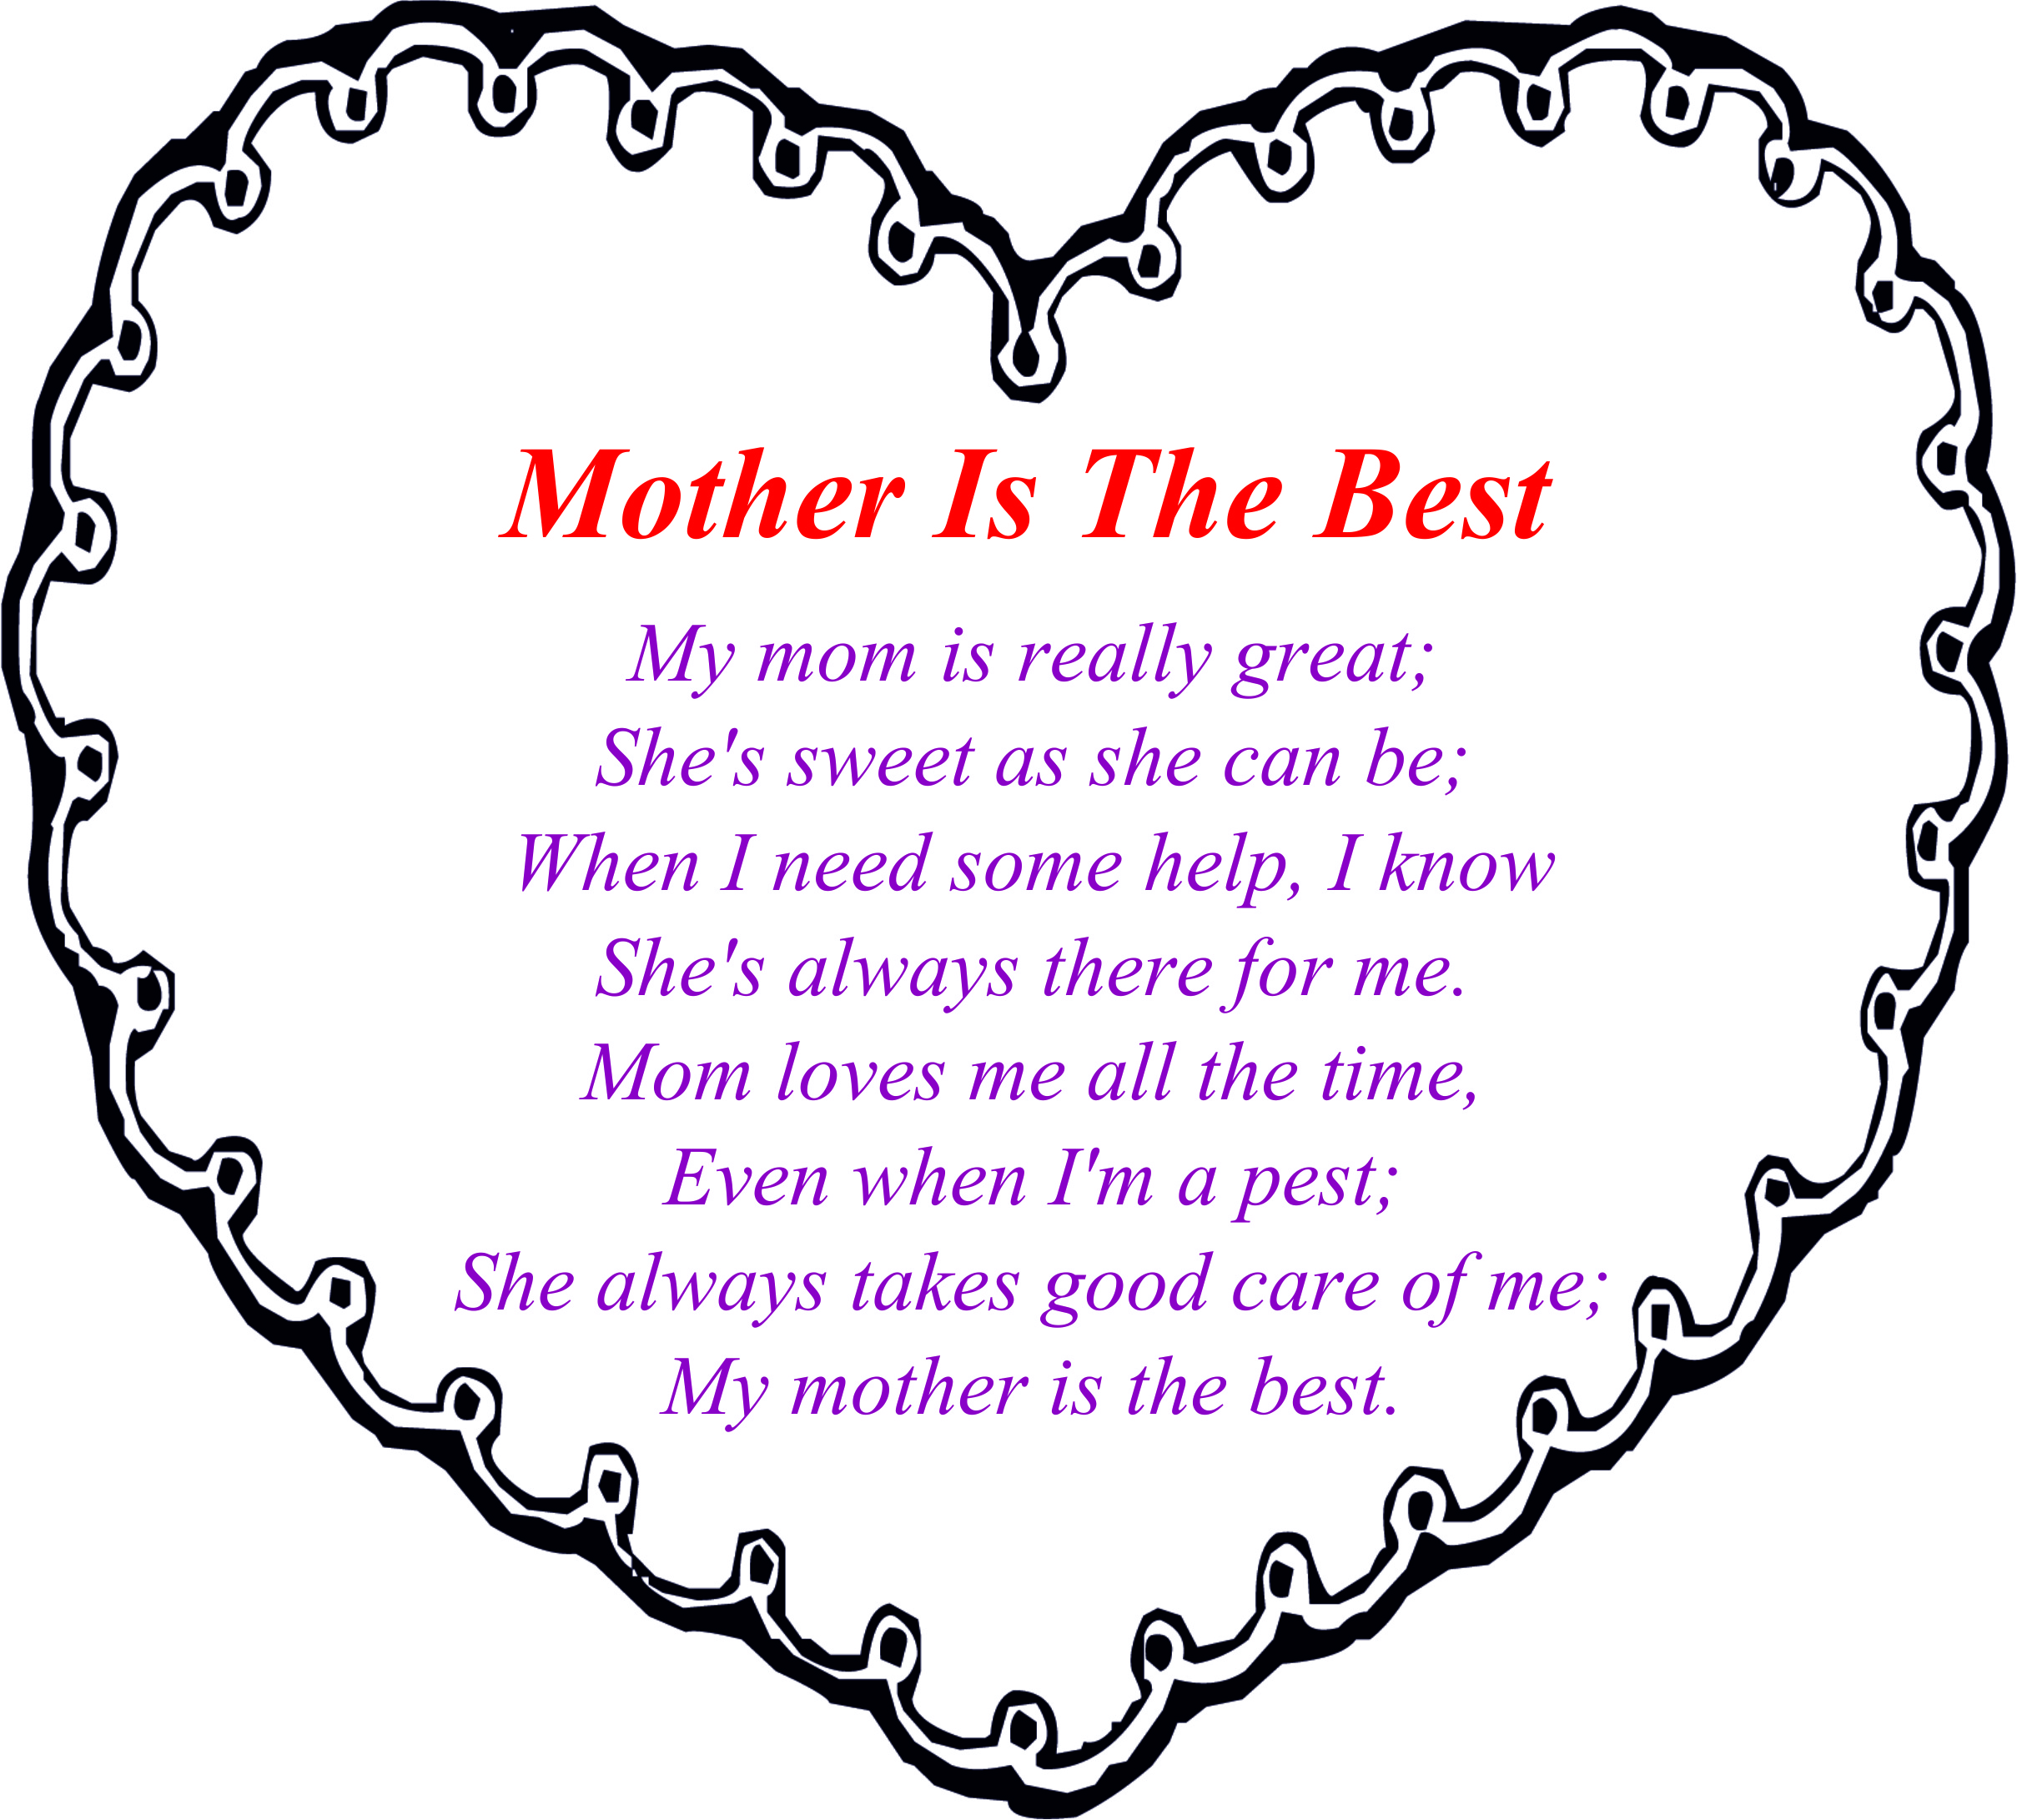 3 Funny Mother's Day Poems That Are LOL Worthy